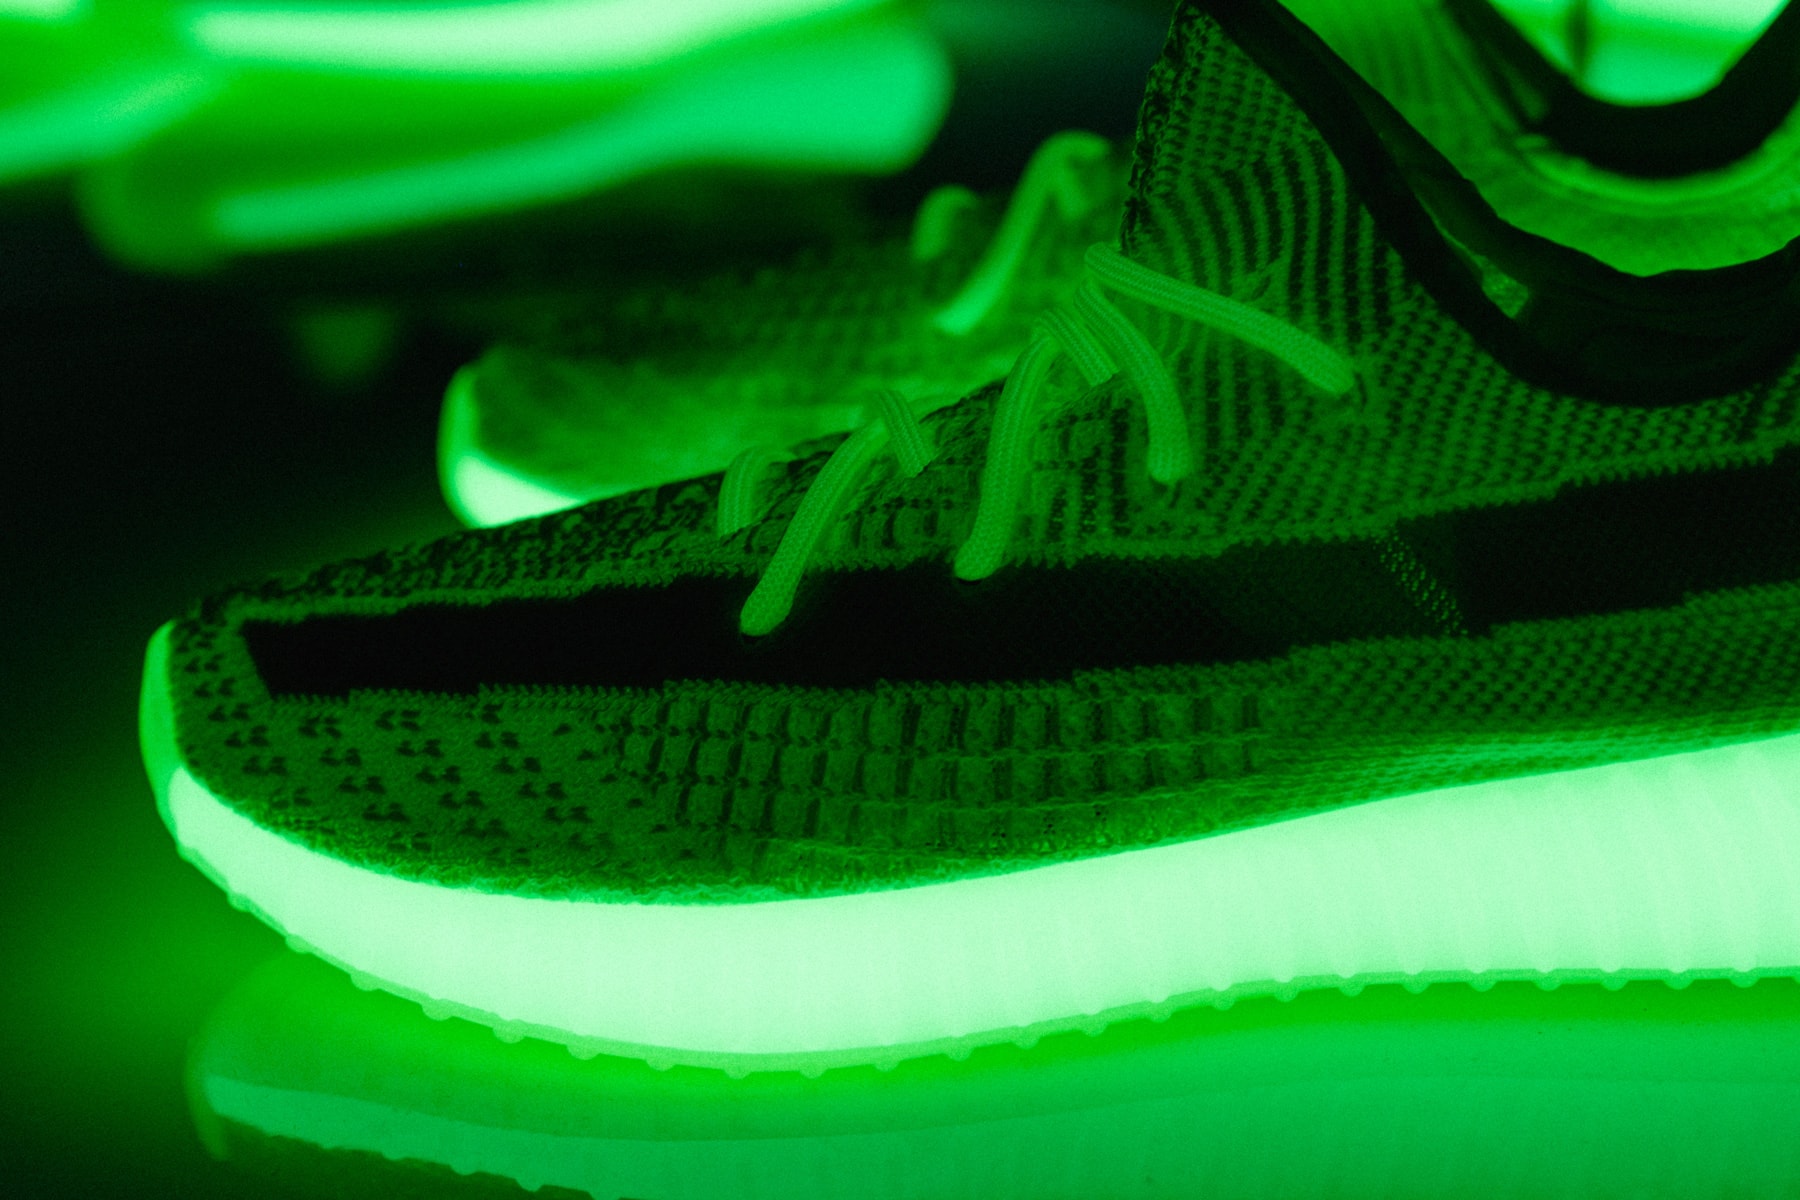 YEEZY BOOST 350 V2 "Glow-in-the-Dark" Closer Look kanye west three stripes